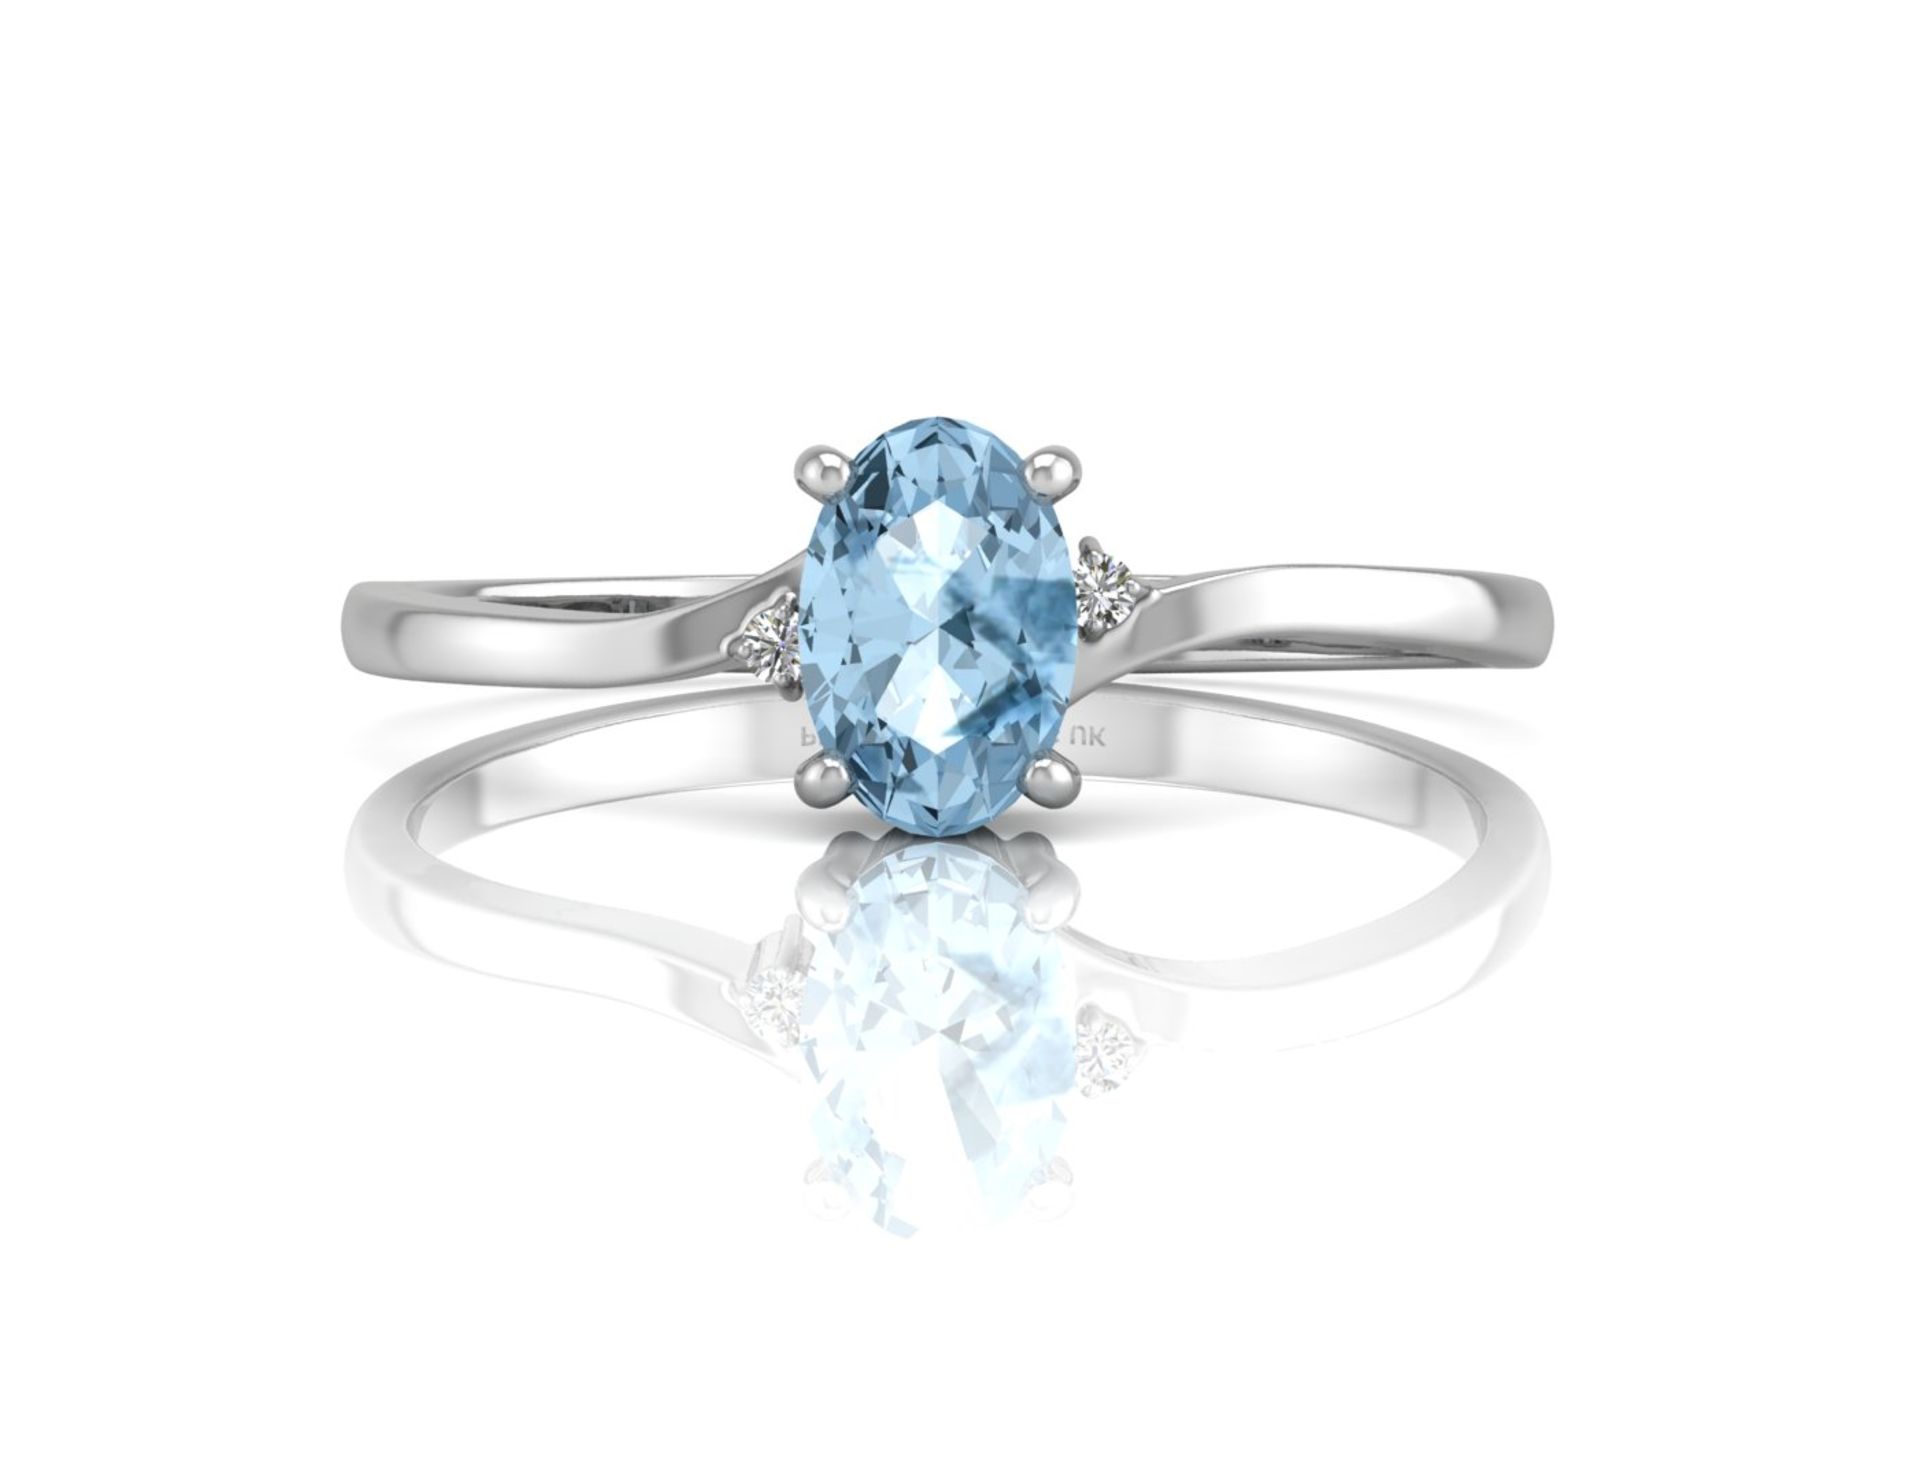 9ct White Gold Diamond and Oval Shape Blue Topaz Ring 0.01 Carats - Valued by AGI £650.00 - 9ct - Image 4 of 8